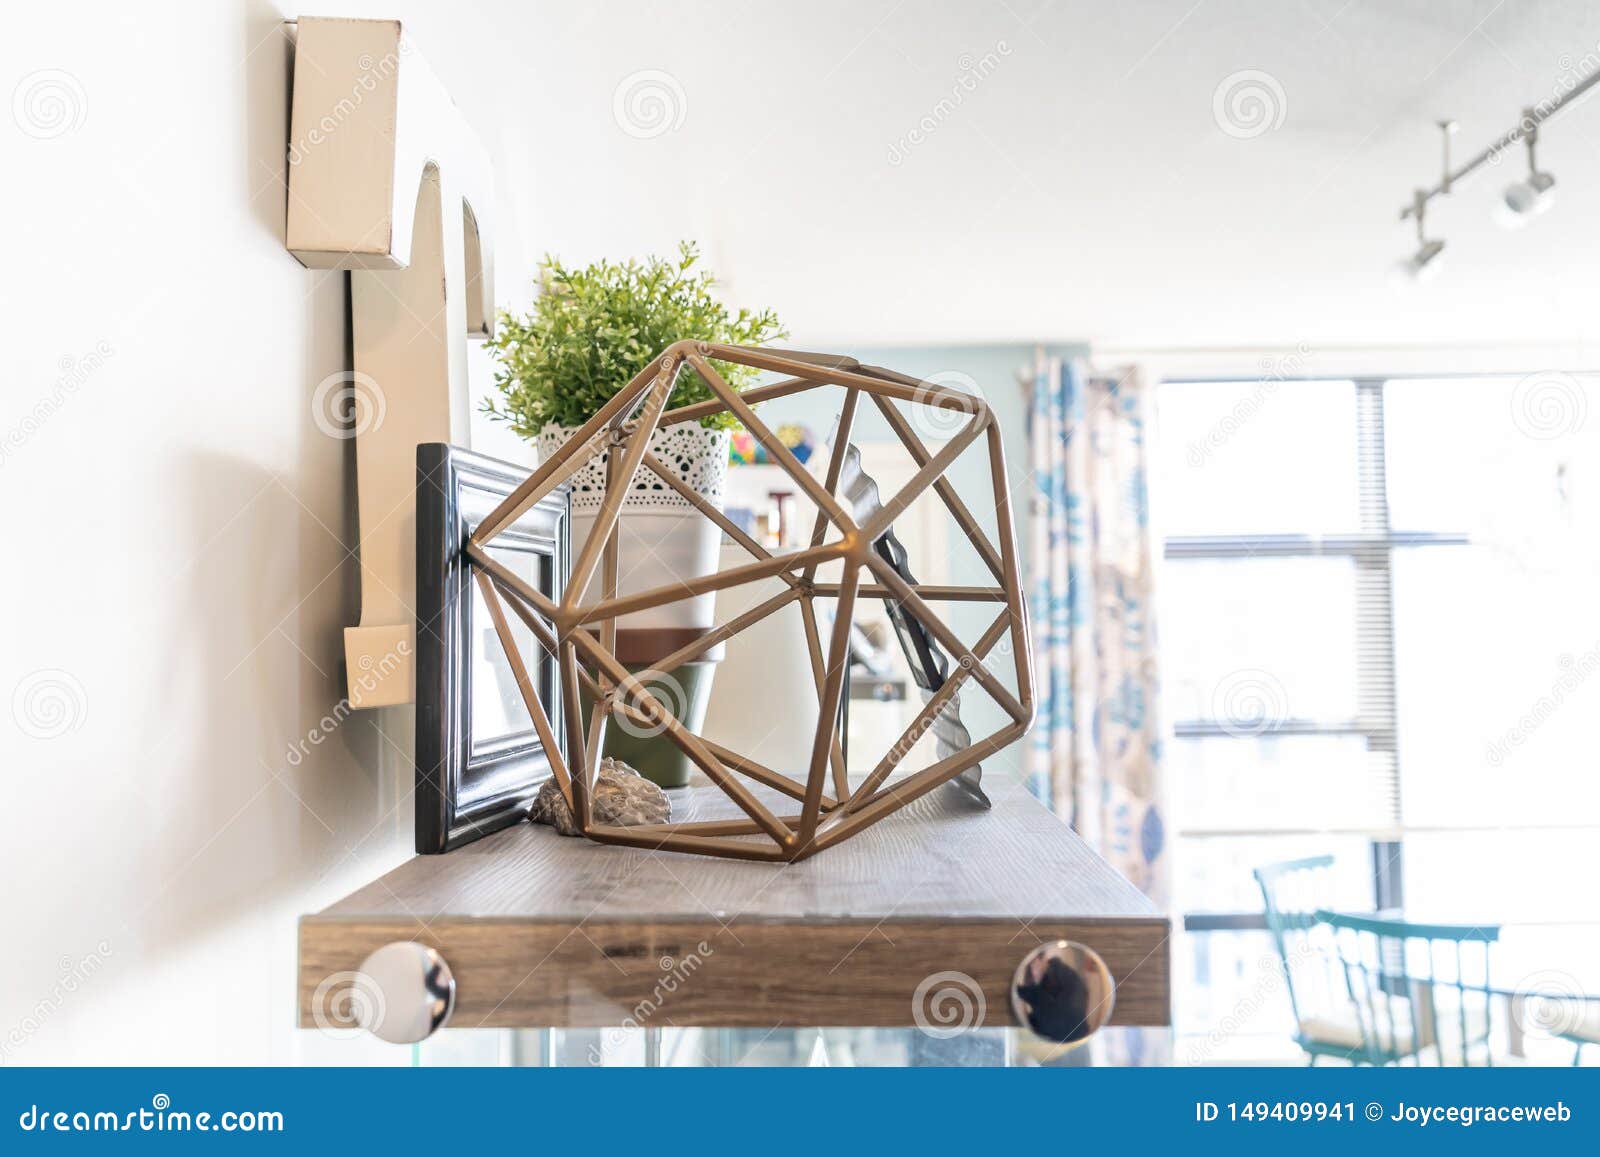 home shelf with decorative knick knacks, including a geometric wire object, a letter `t`, picture frames and a planter. bright liv